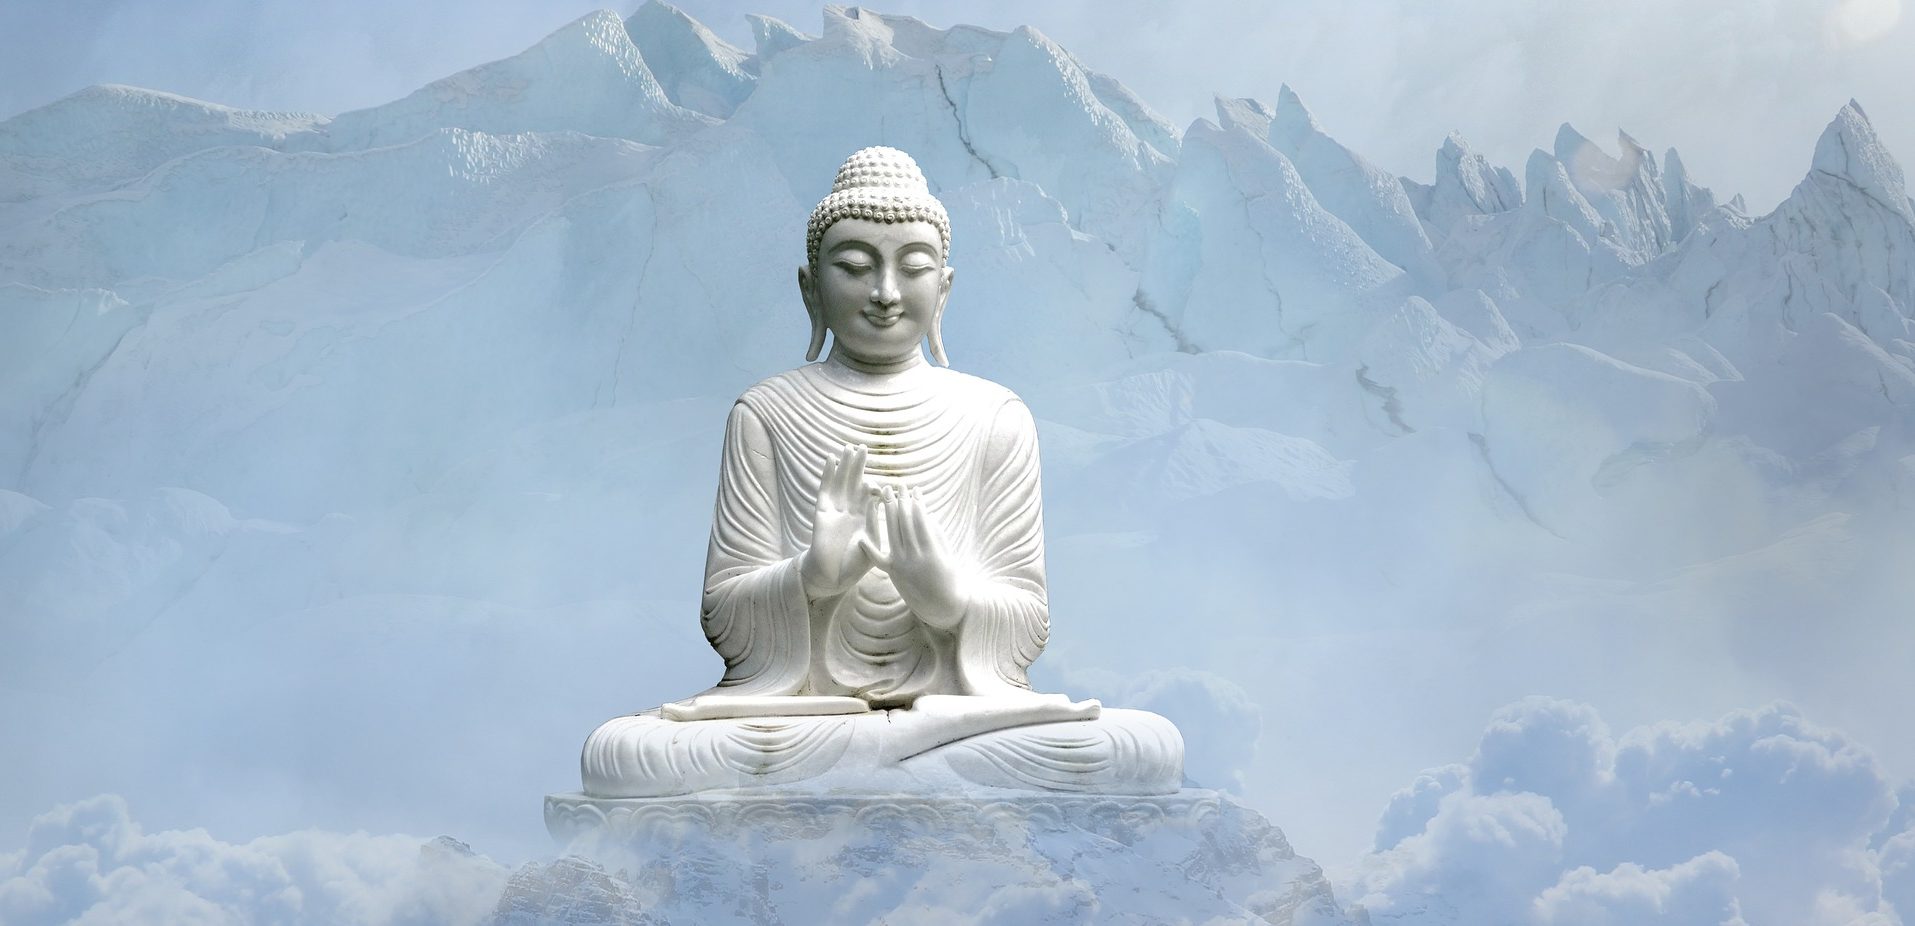 Buddha Meditation in clouds and mountains